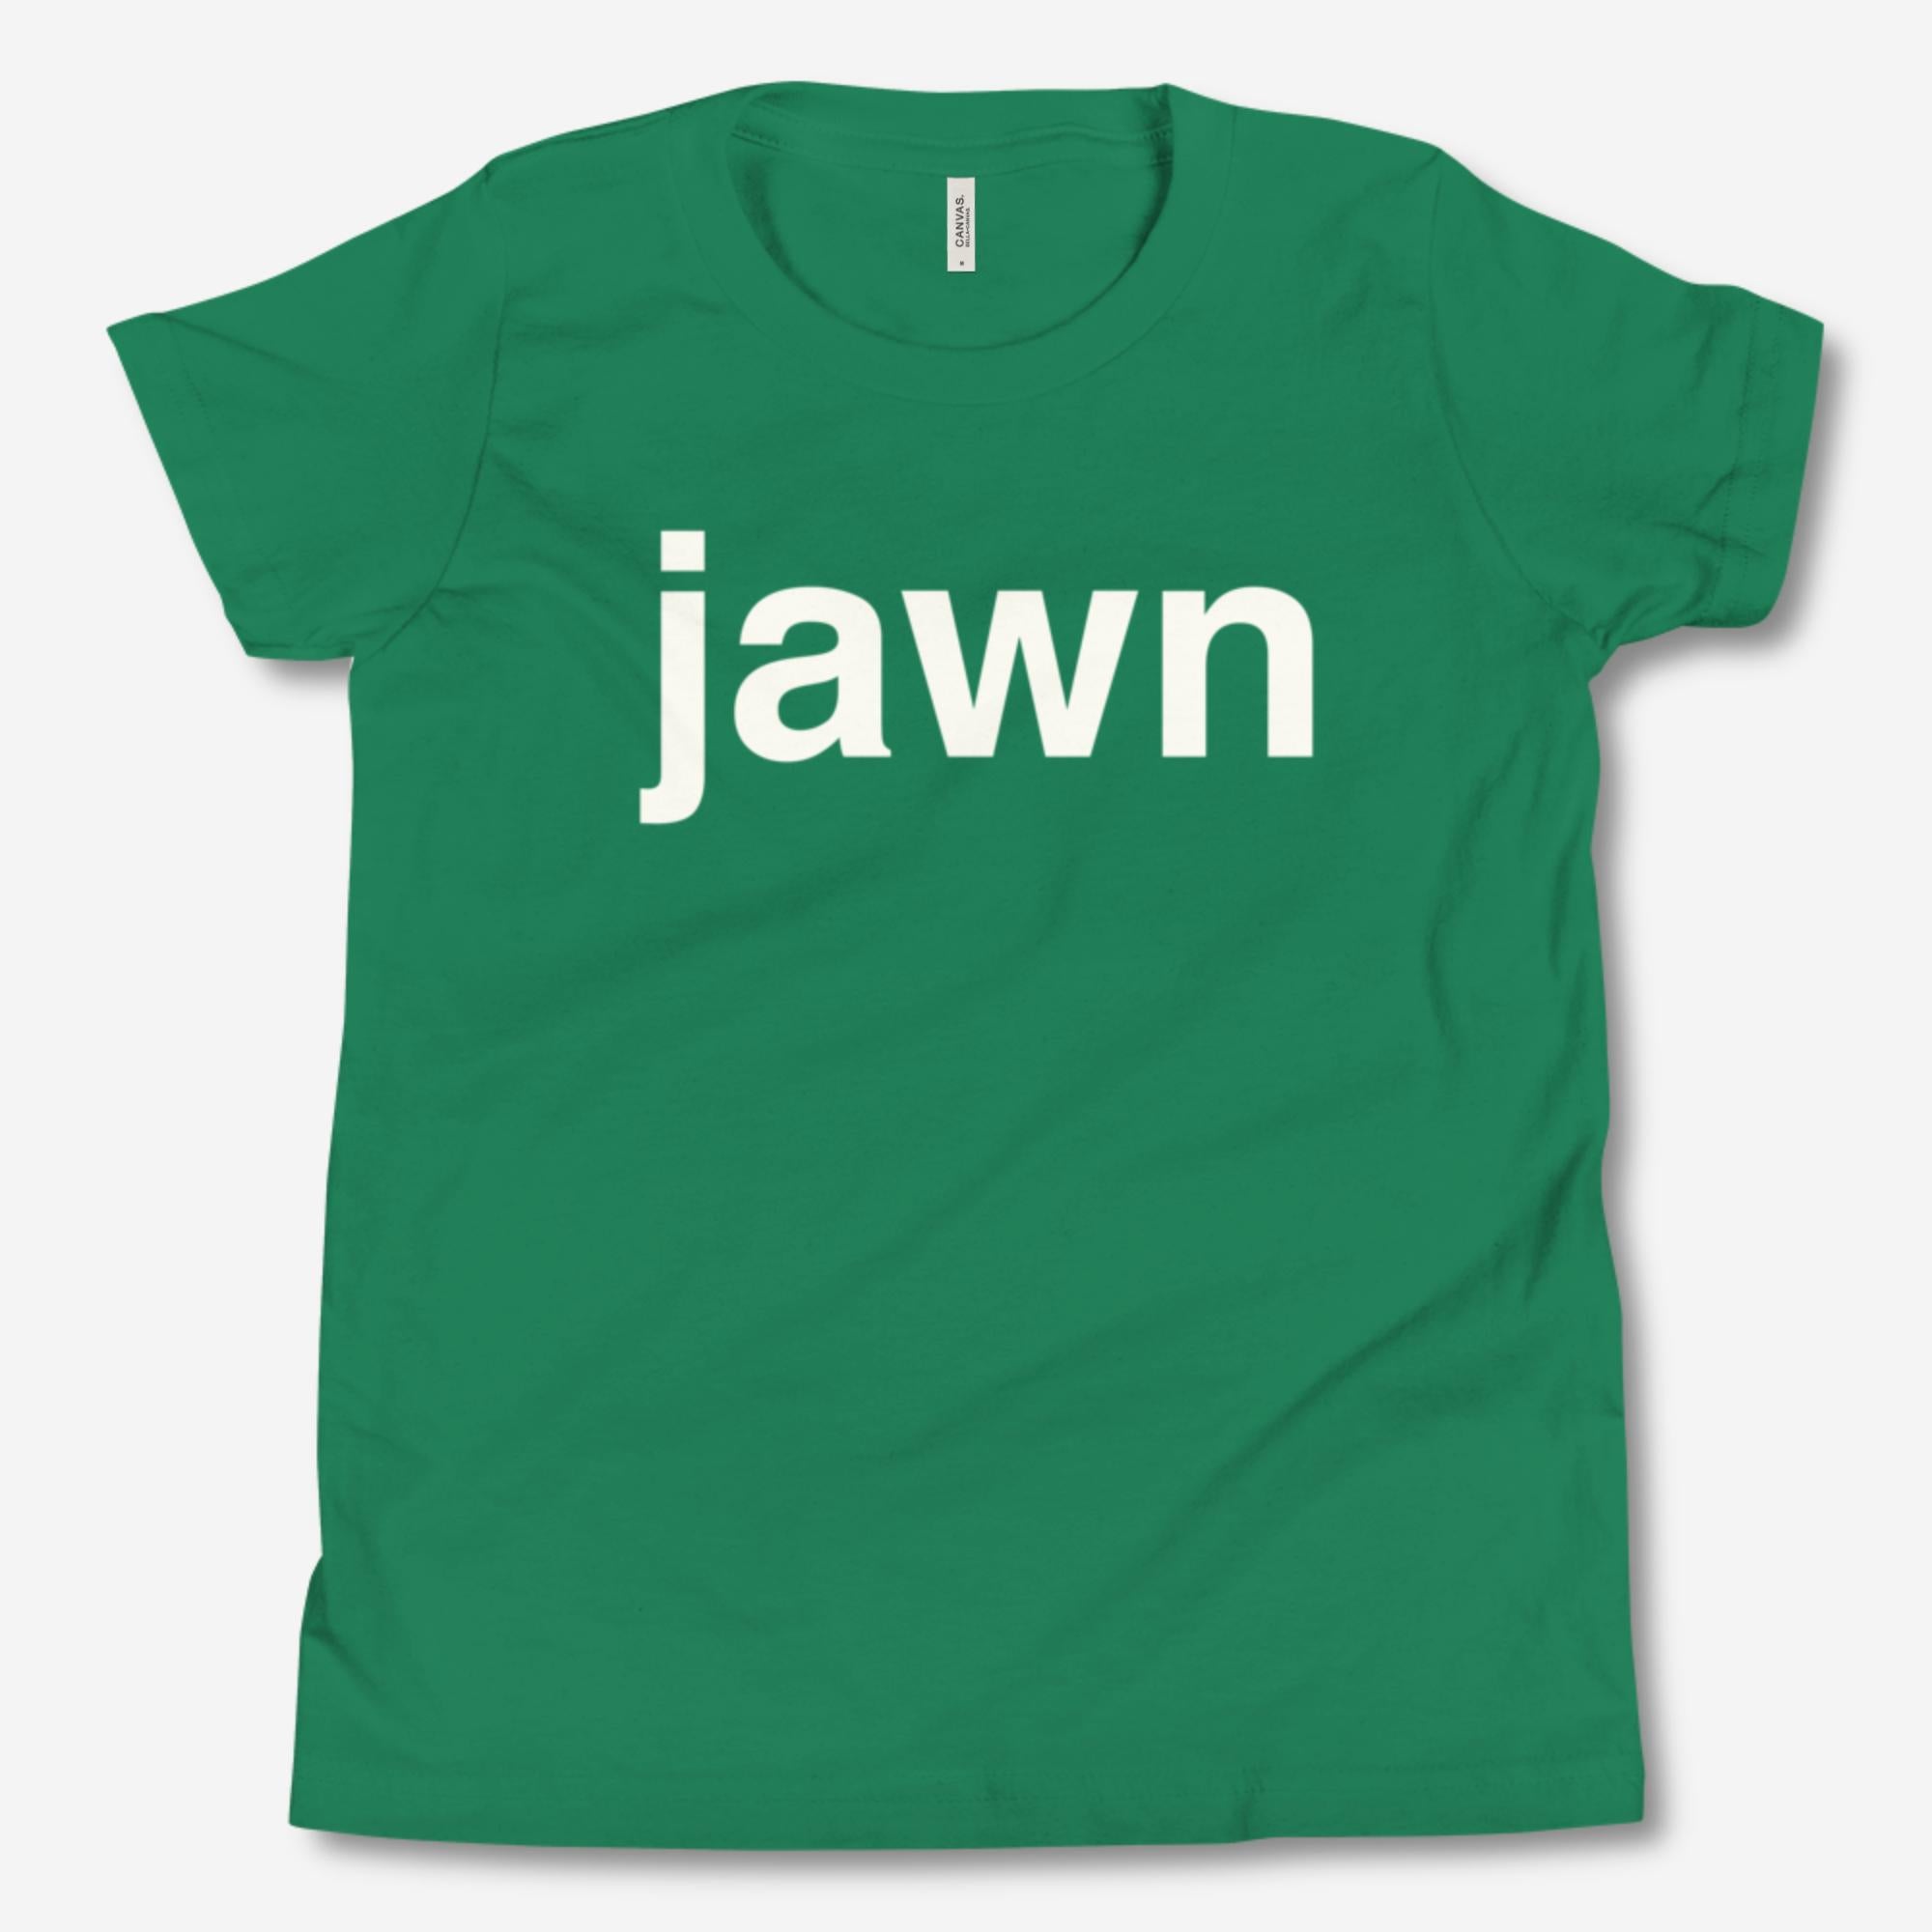 "Helvetica Jawn" Youth Tee